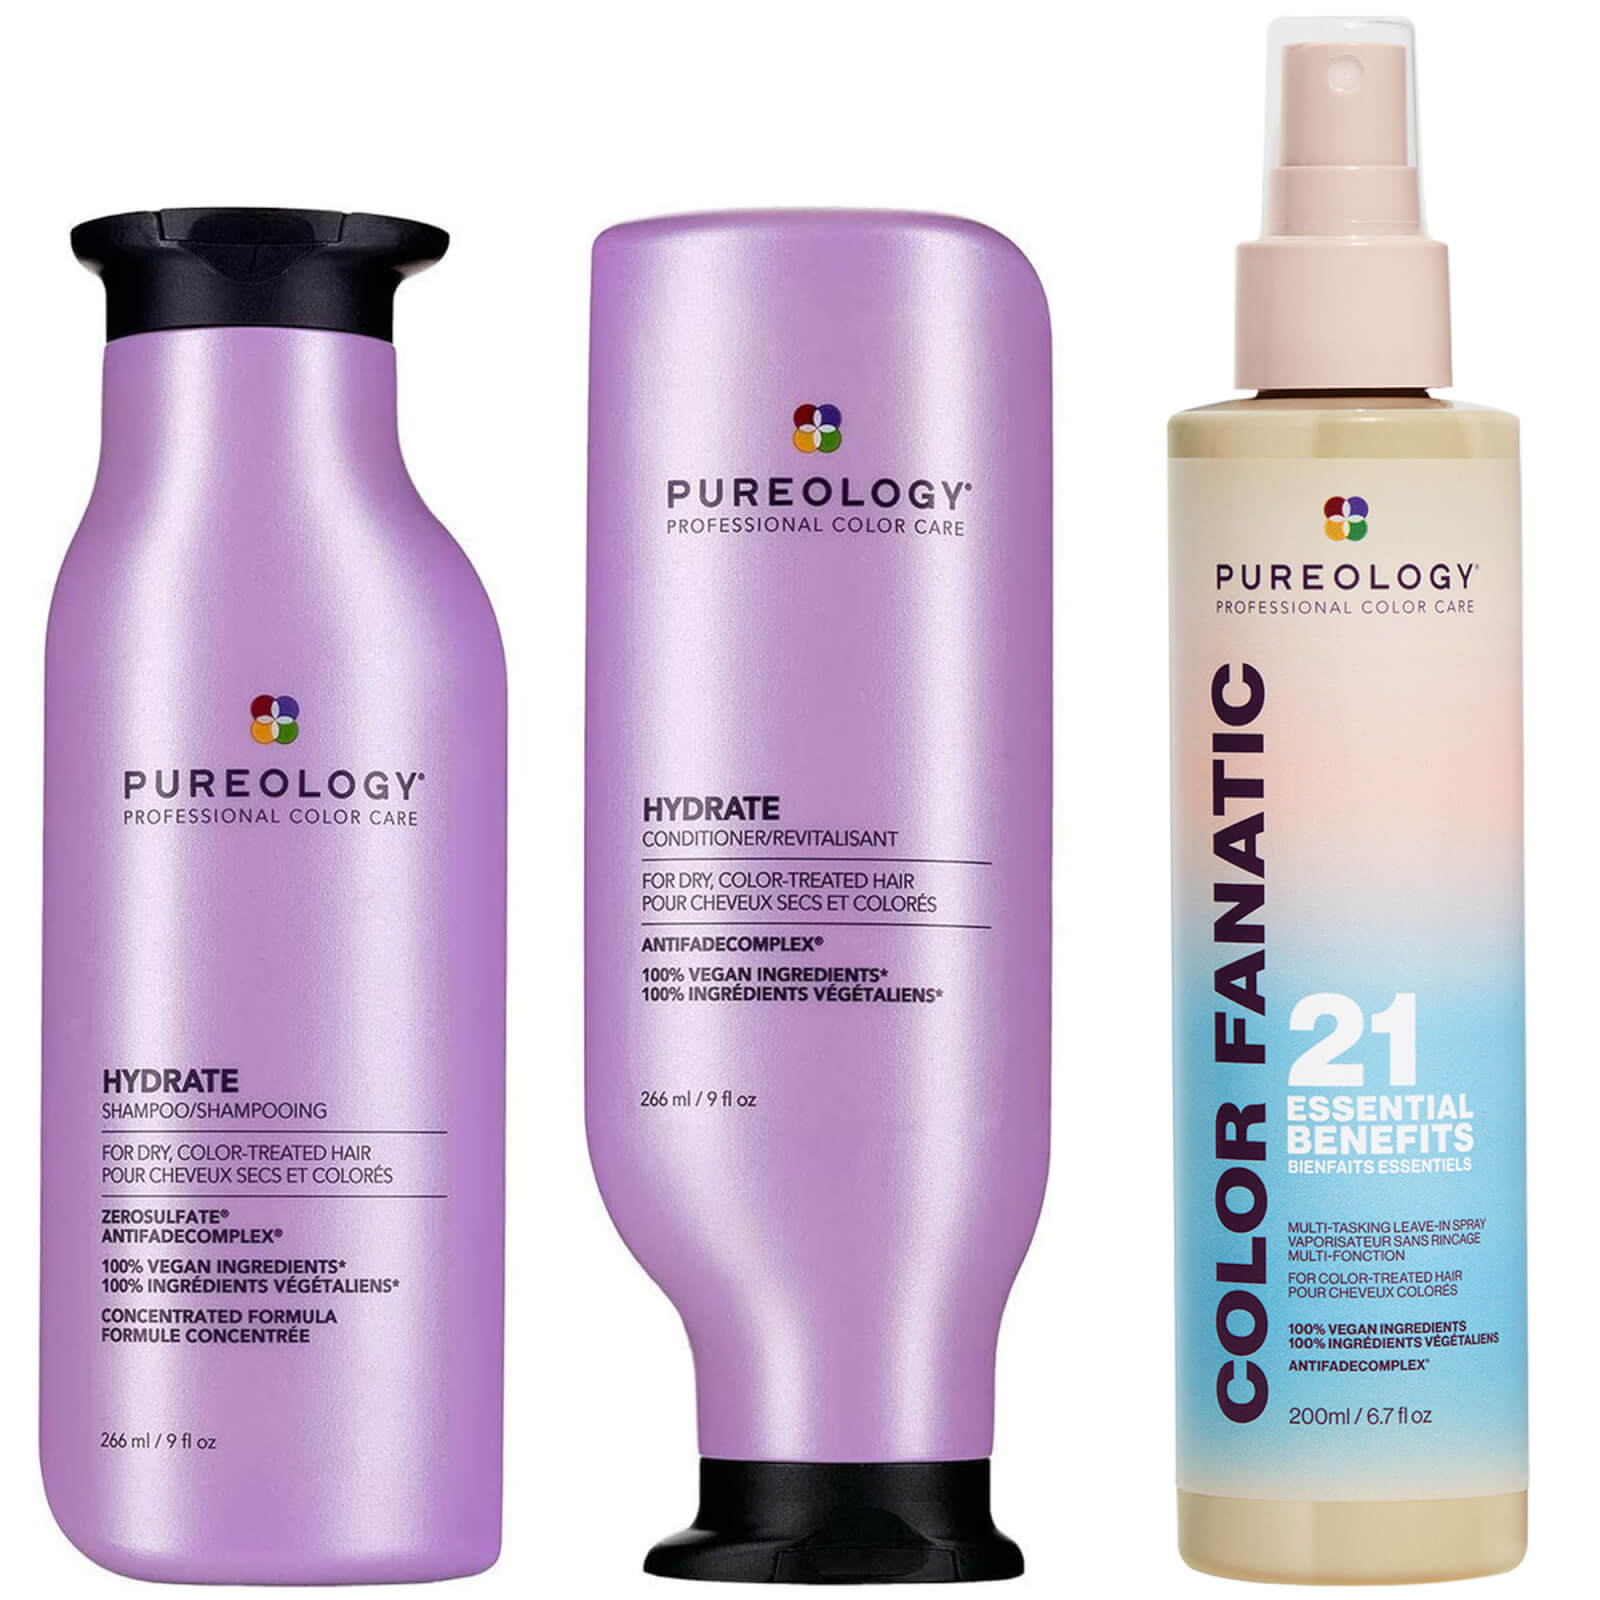 Photos - Hair Product Pureology Hydrate Shampoo, Conditioner and Color Fanatic Multi-Benefit Lea